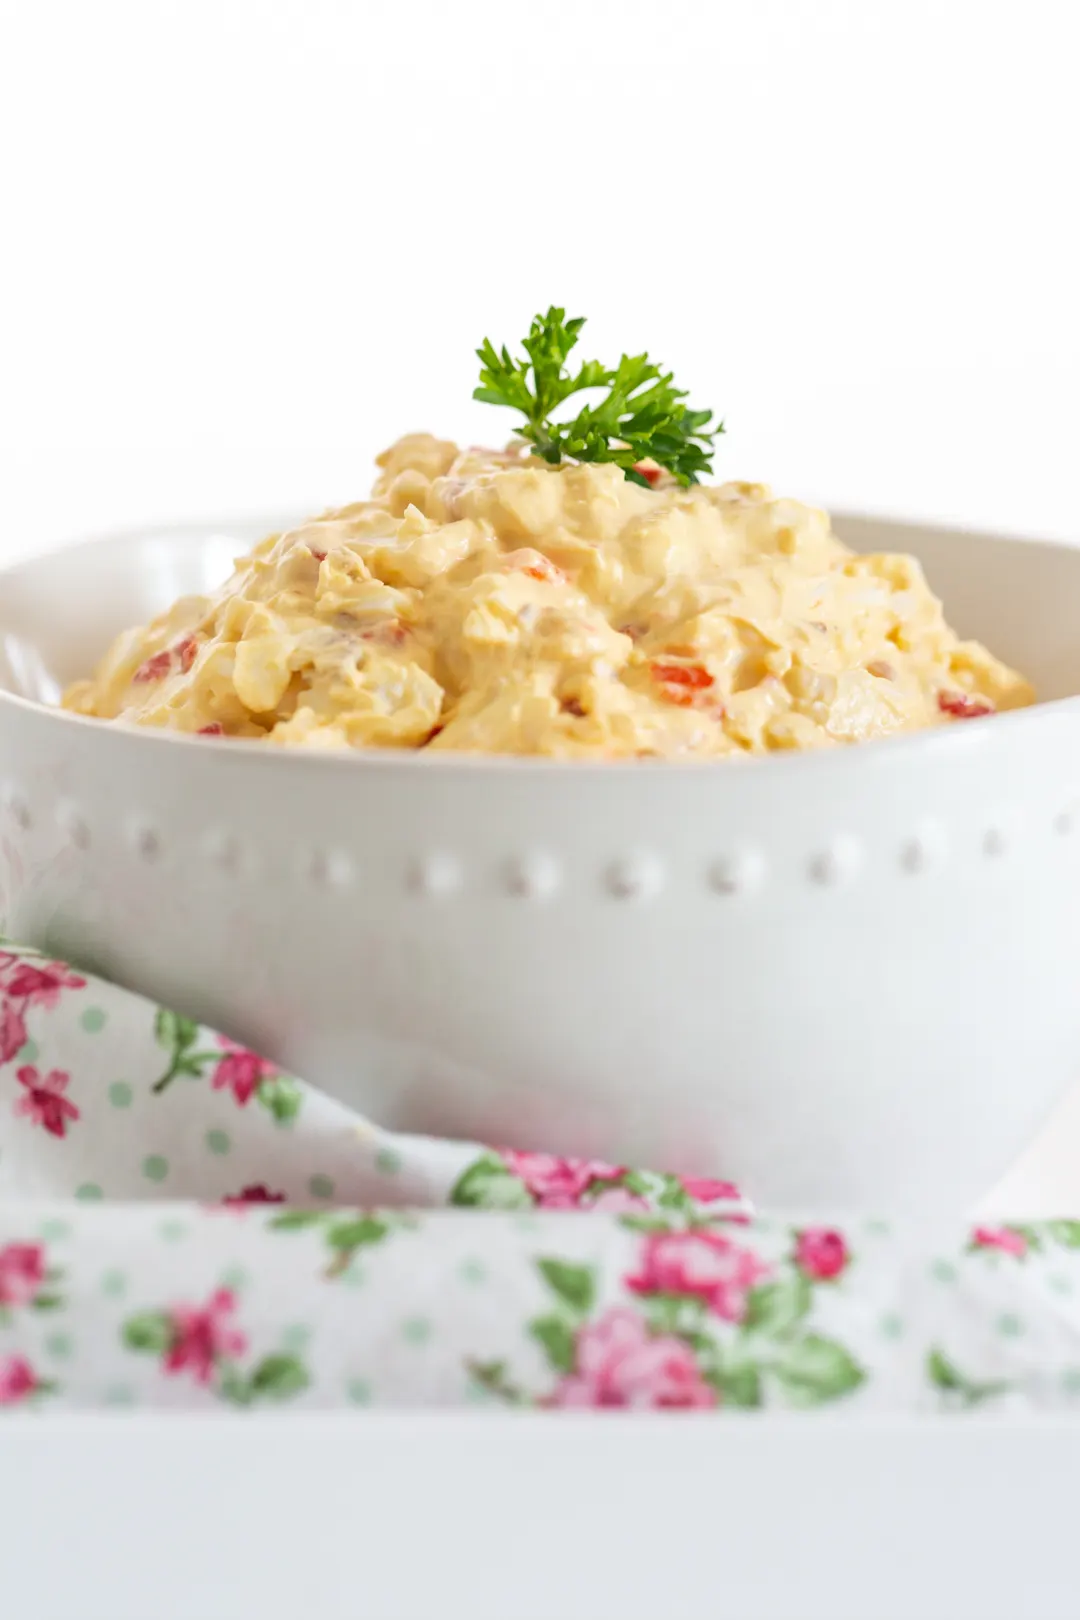 up close view of white bowl filled with egg salad and topped with curly parsley.